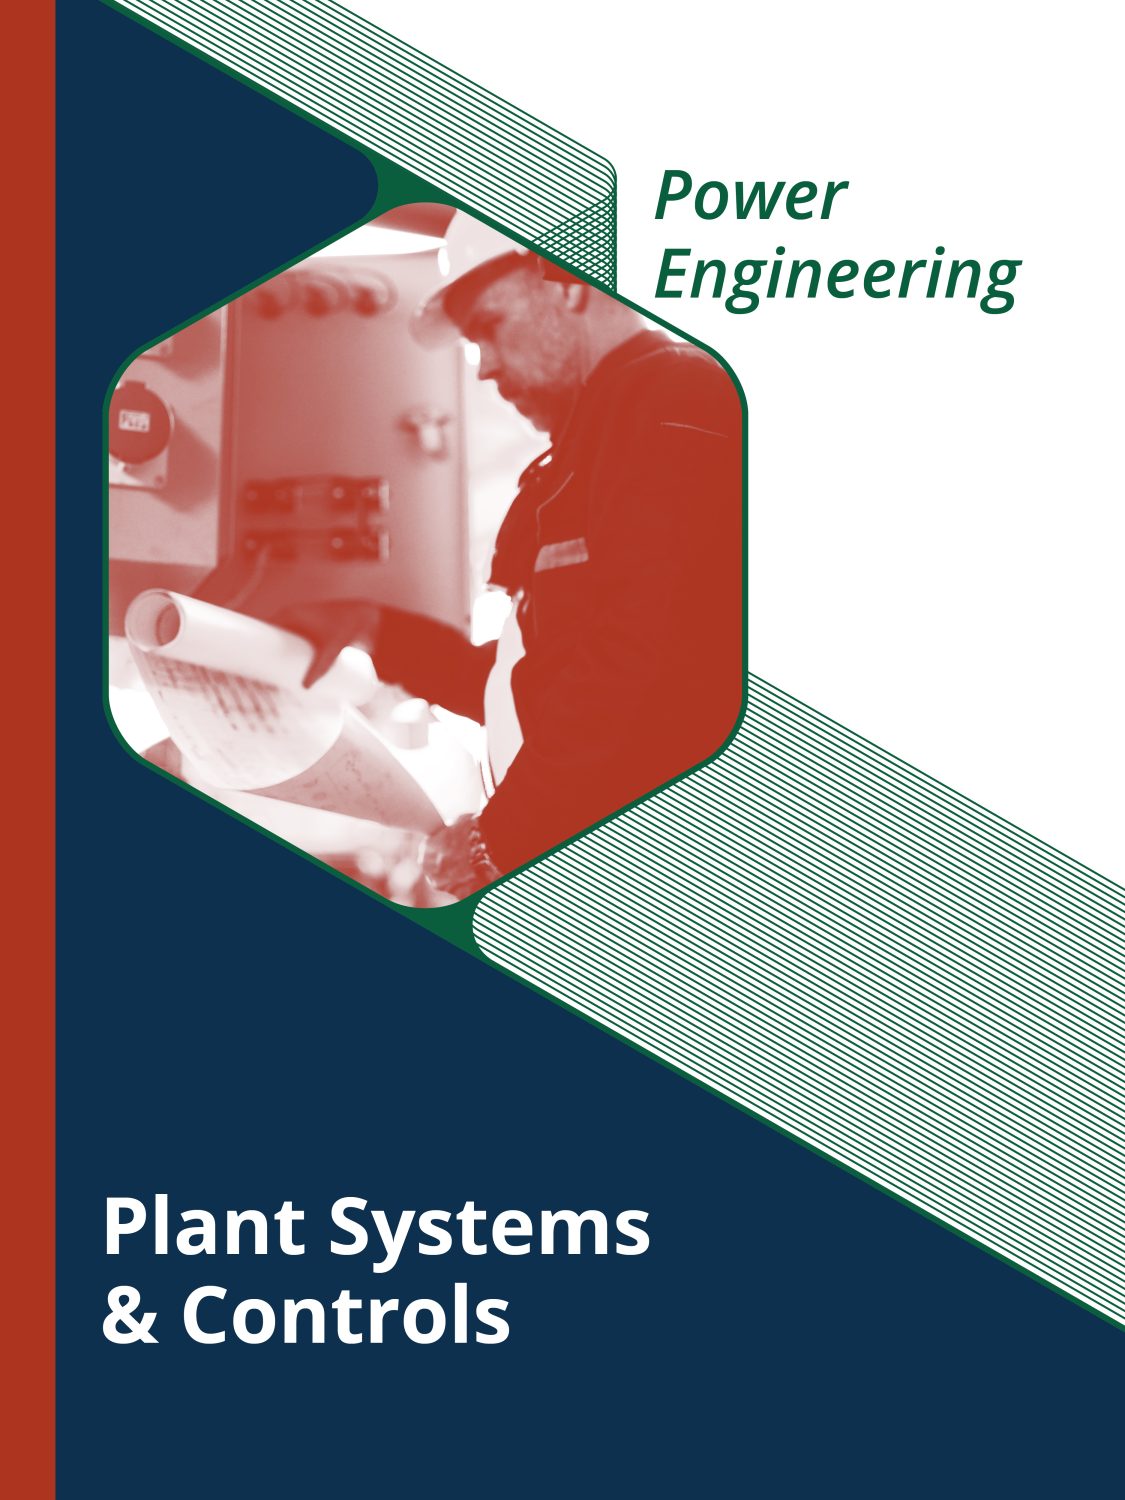 Cover image for 2B2 - PEG 3725 Power Plant Systems & Controls